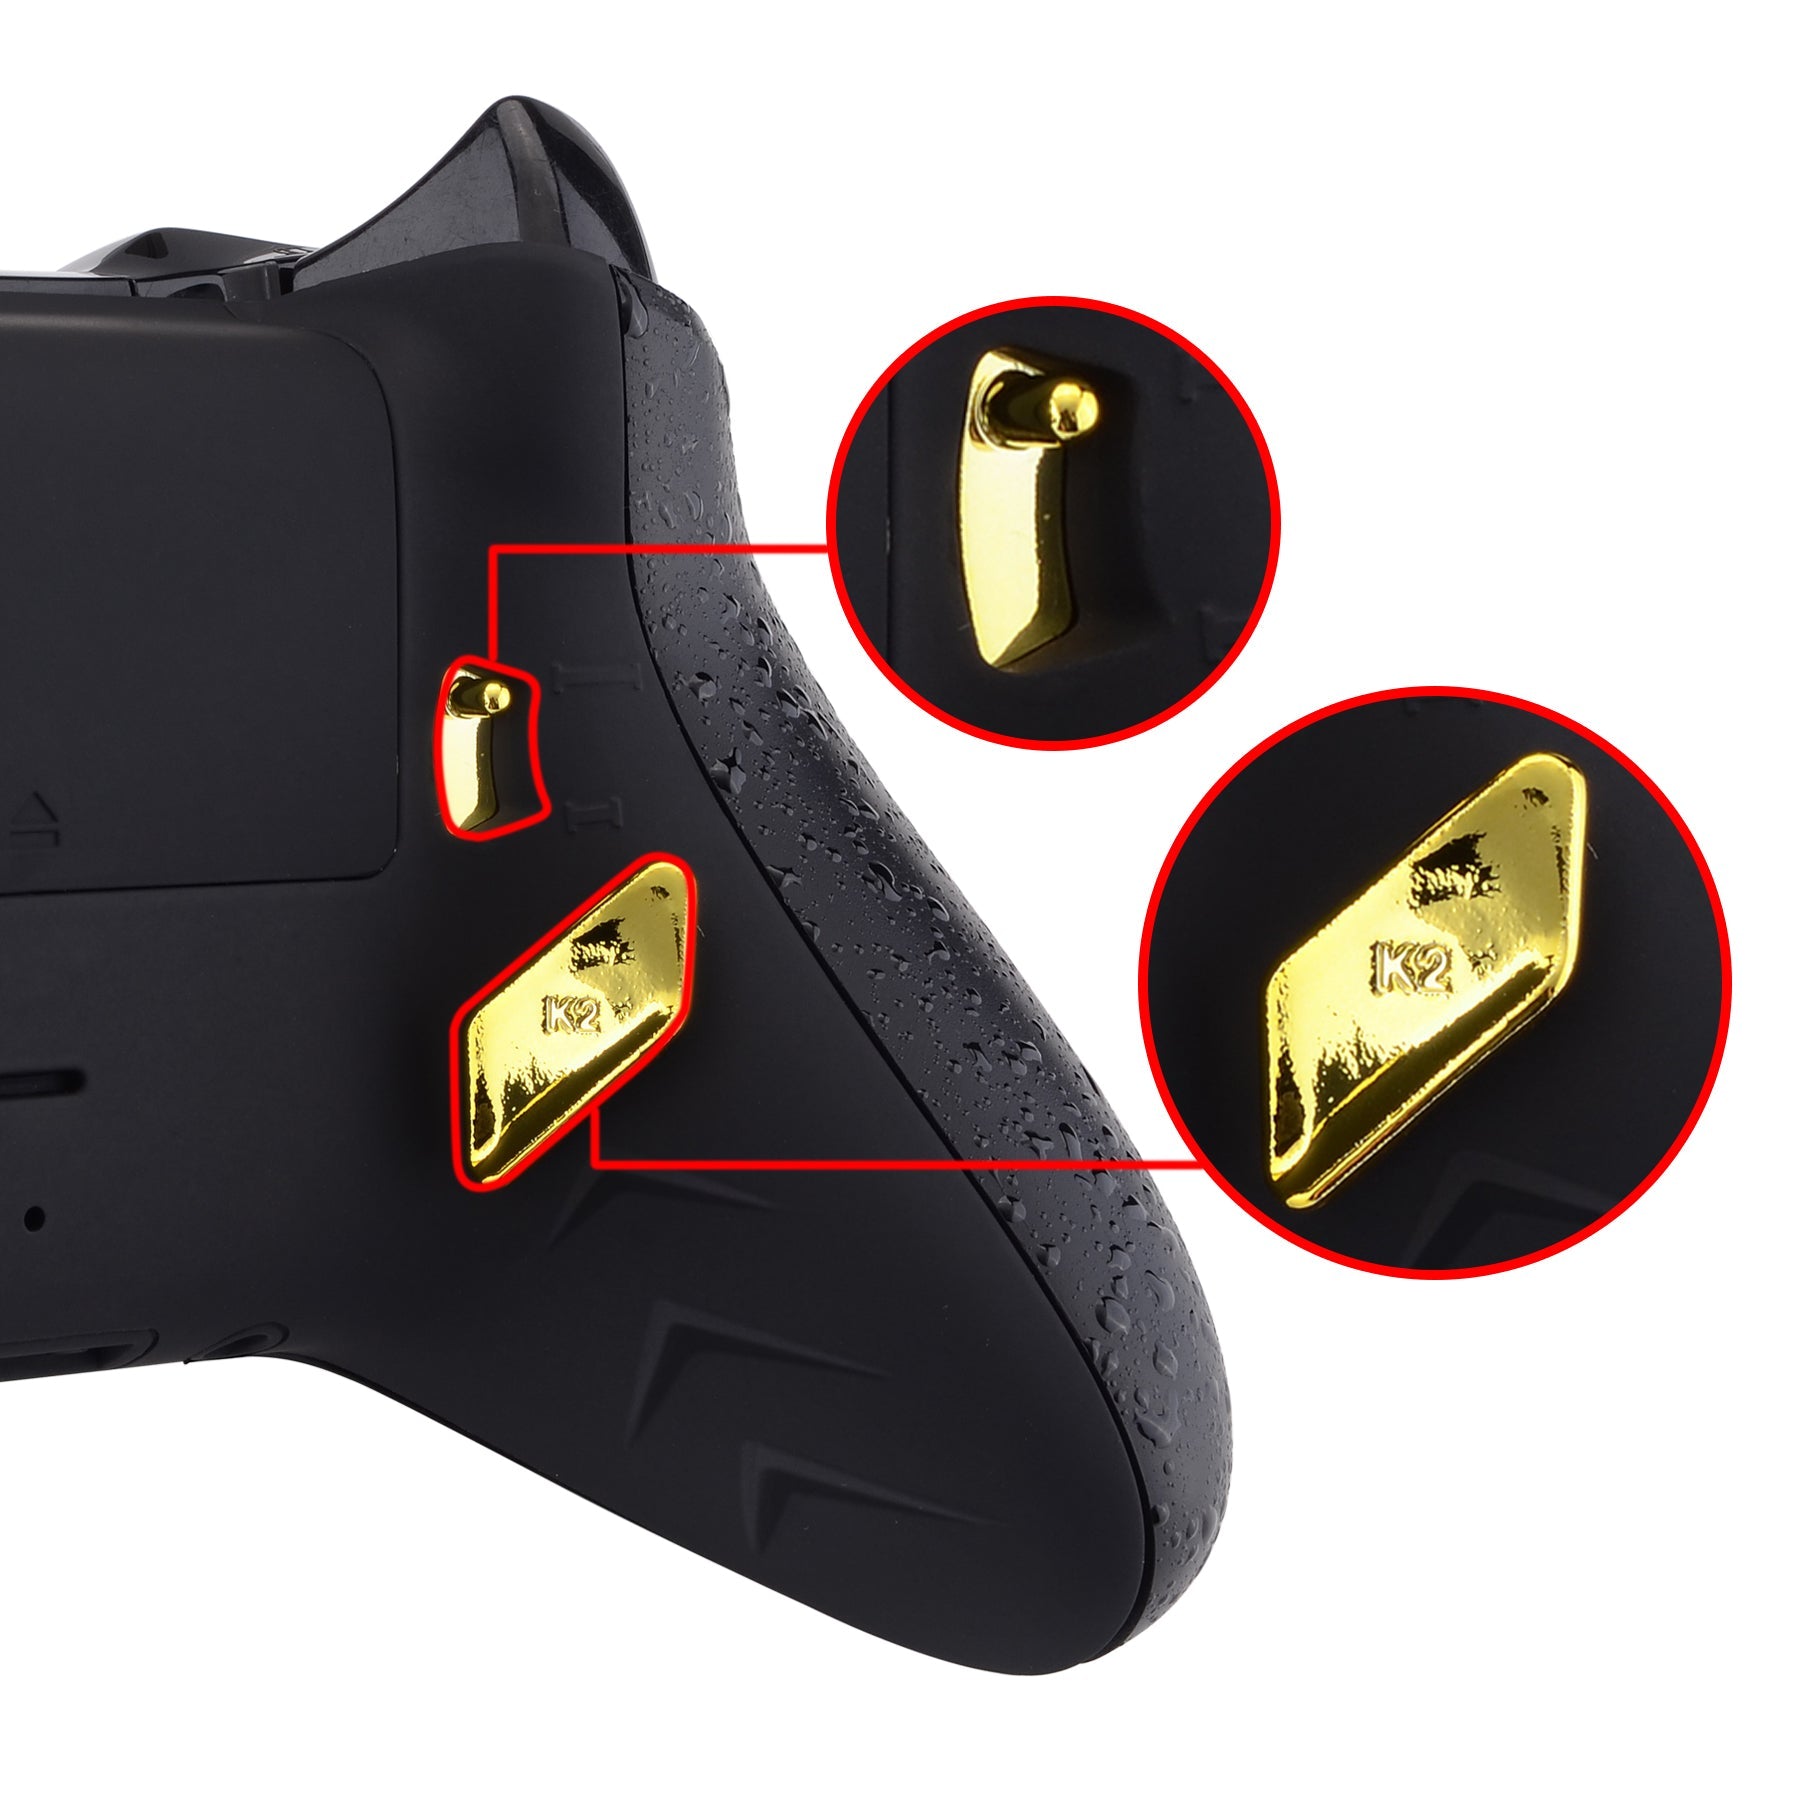 eXtremeRate Retail Chrome Gold Glossy Replacement Redesigned Back Buttons HK3 HK4 Trigger lock K1 K2 Paddles for eXtremeRate Xbox One S X Controller LOFTY Remap & Trigger Stop Kit - XOMD0032